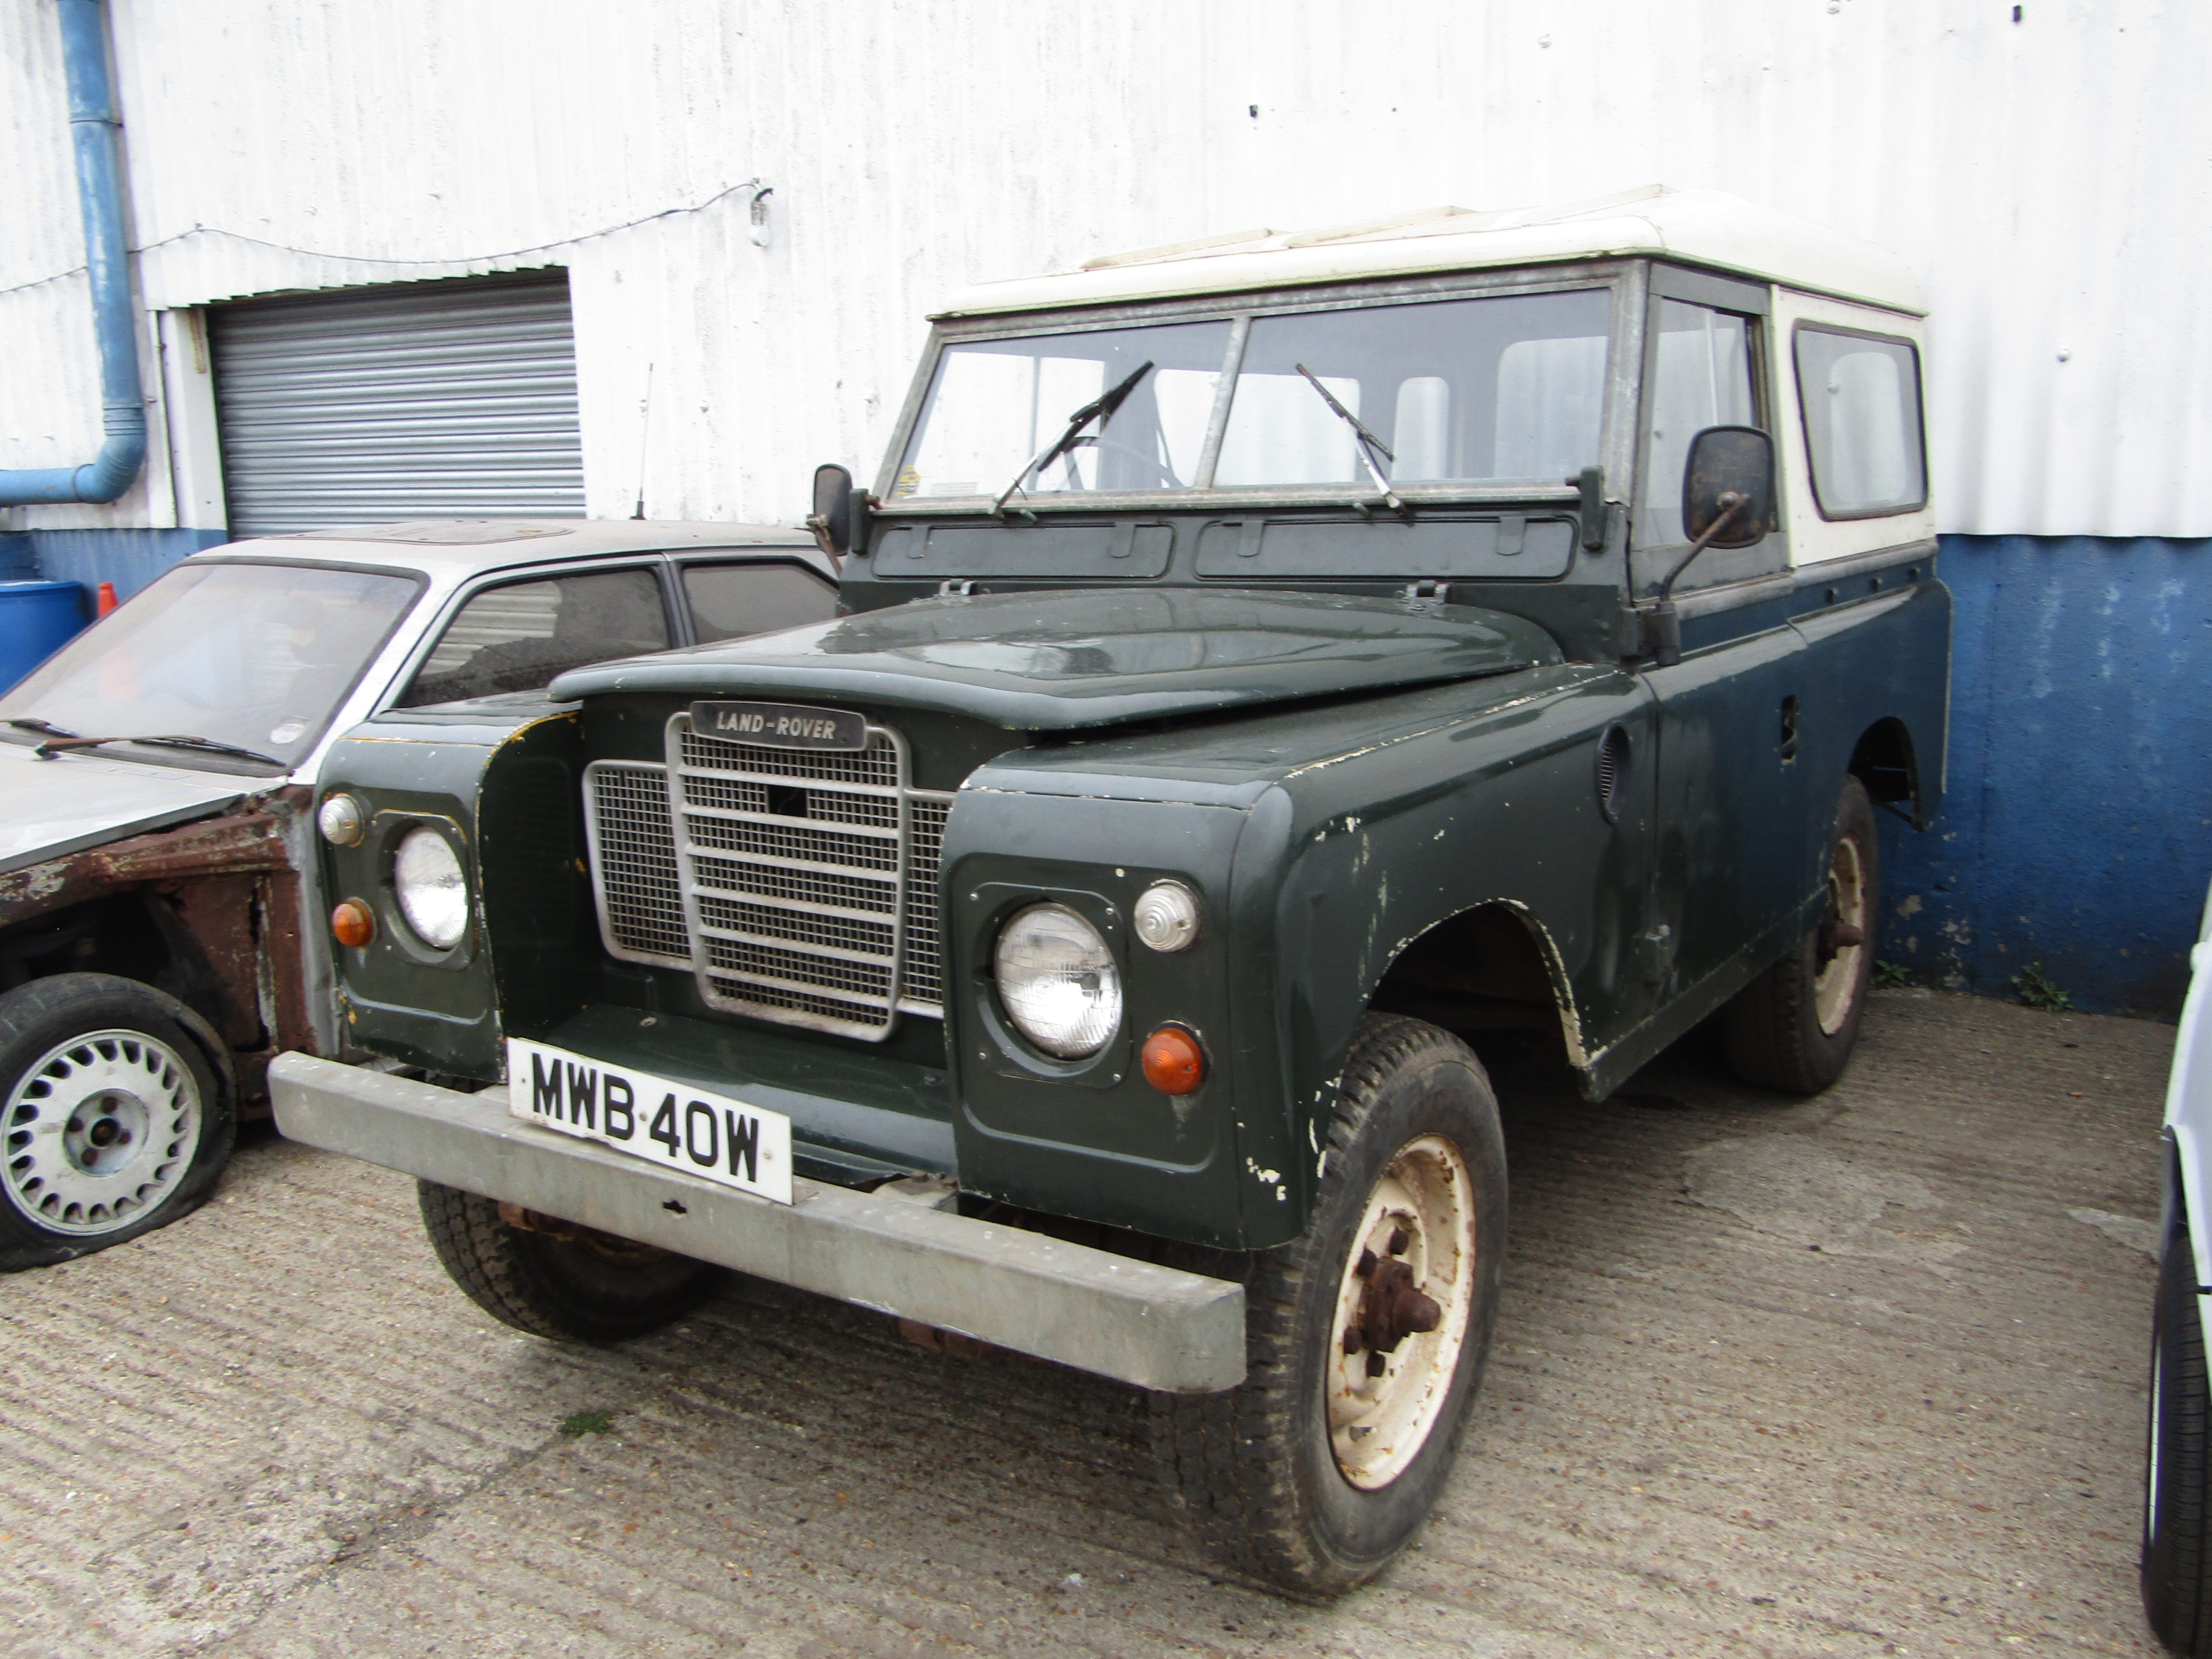 1981 Land Rover Series 3 SWB - Image 3 of 20